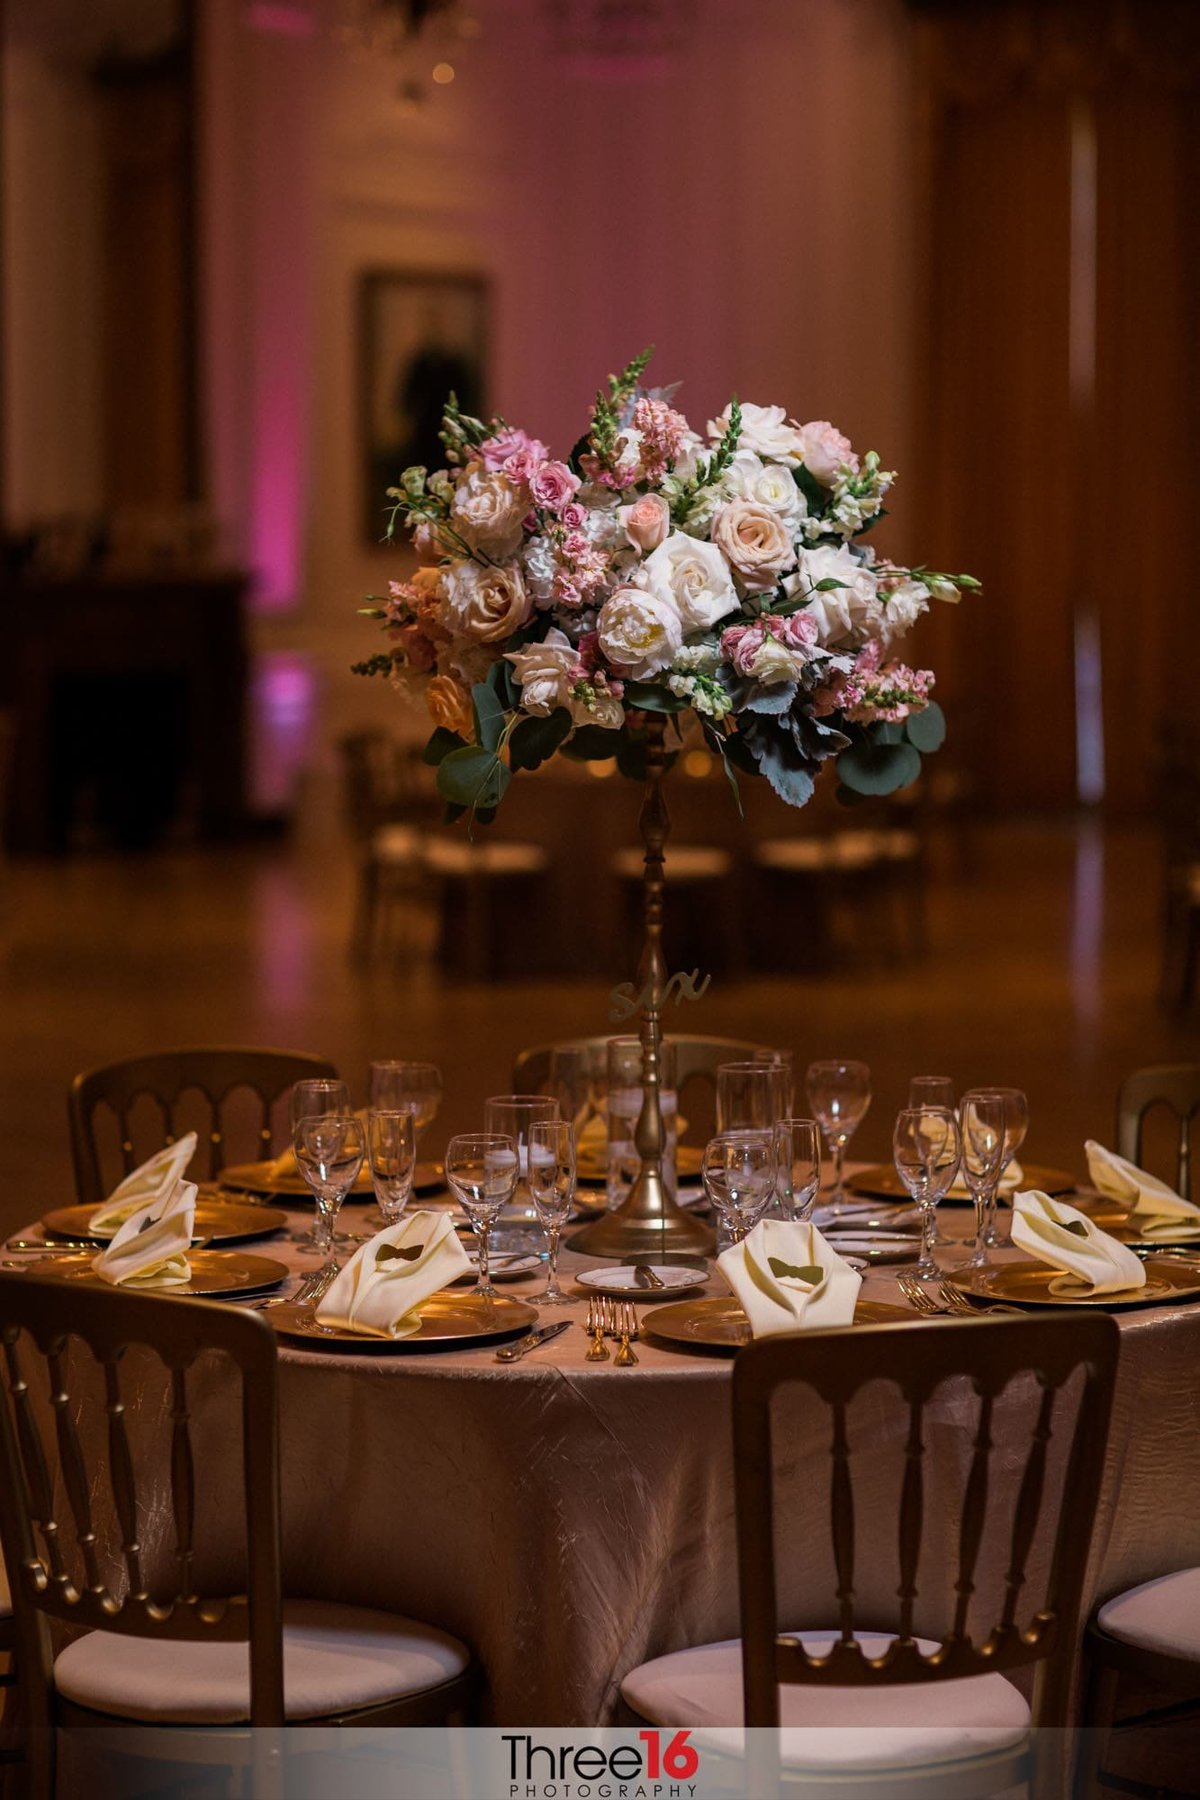 A table setup with centerpiece for wedding reception